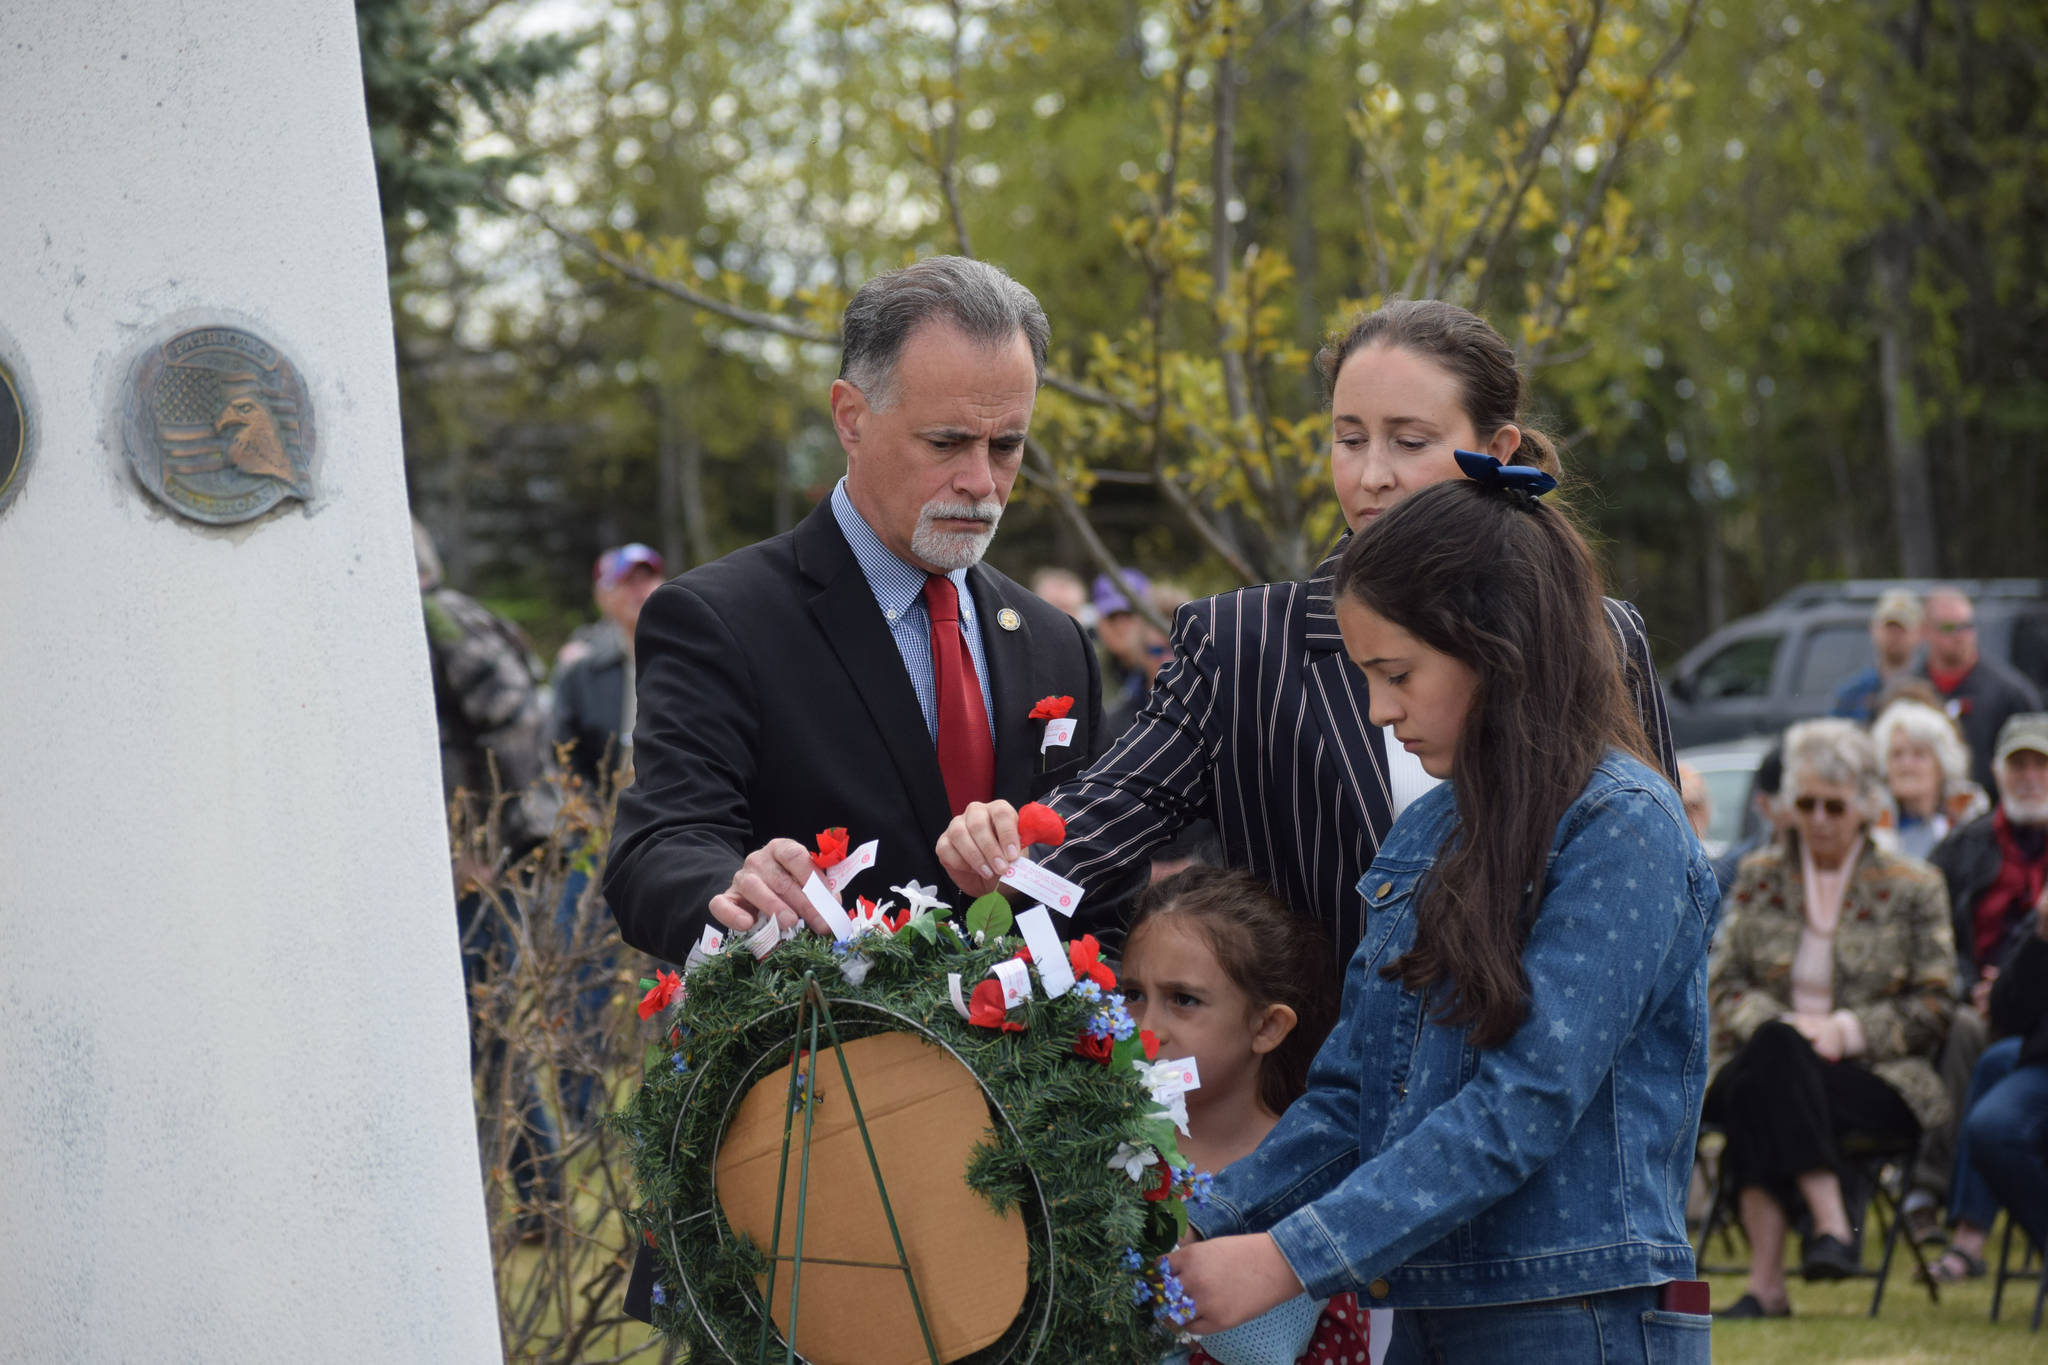 Alaska Senate President Peter Micciche (R-Soldotna) lays a poppy flower on a remberance wreath with his family during the Memorial Day ceremony at Leif Hansen Memorial Park in Kenai, Alaska, on Monday, May 31, 2021. (Camille Botello/Peninsula Clarion)